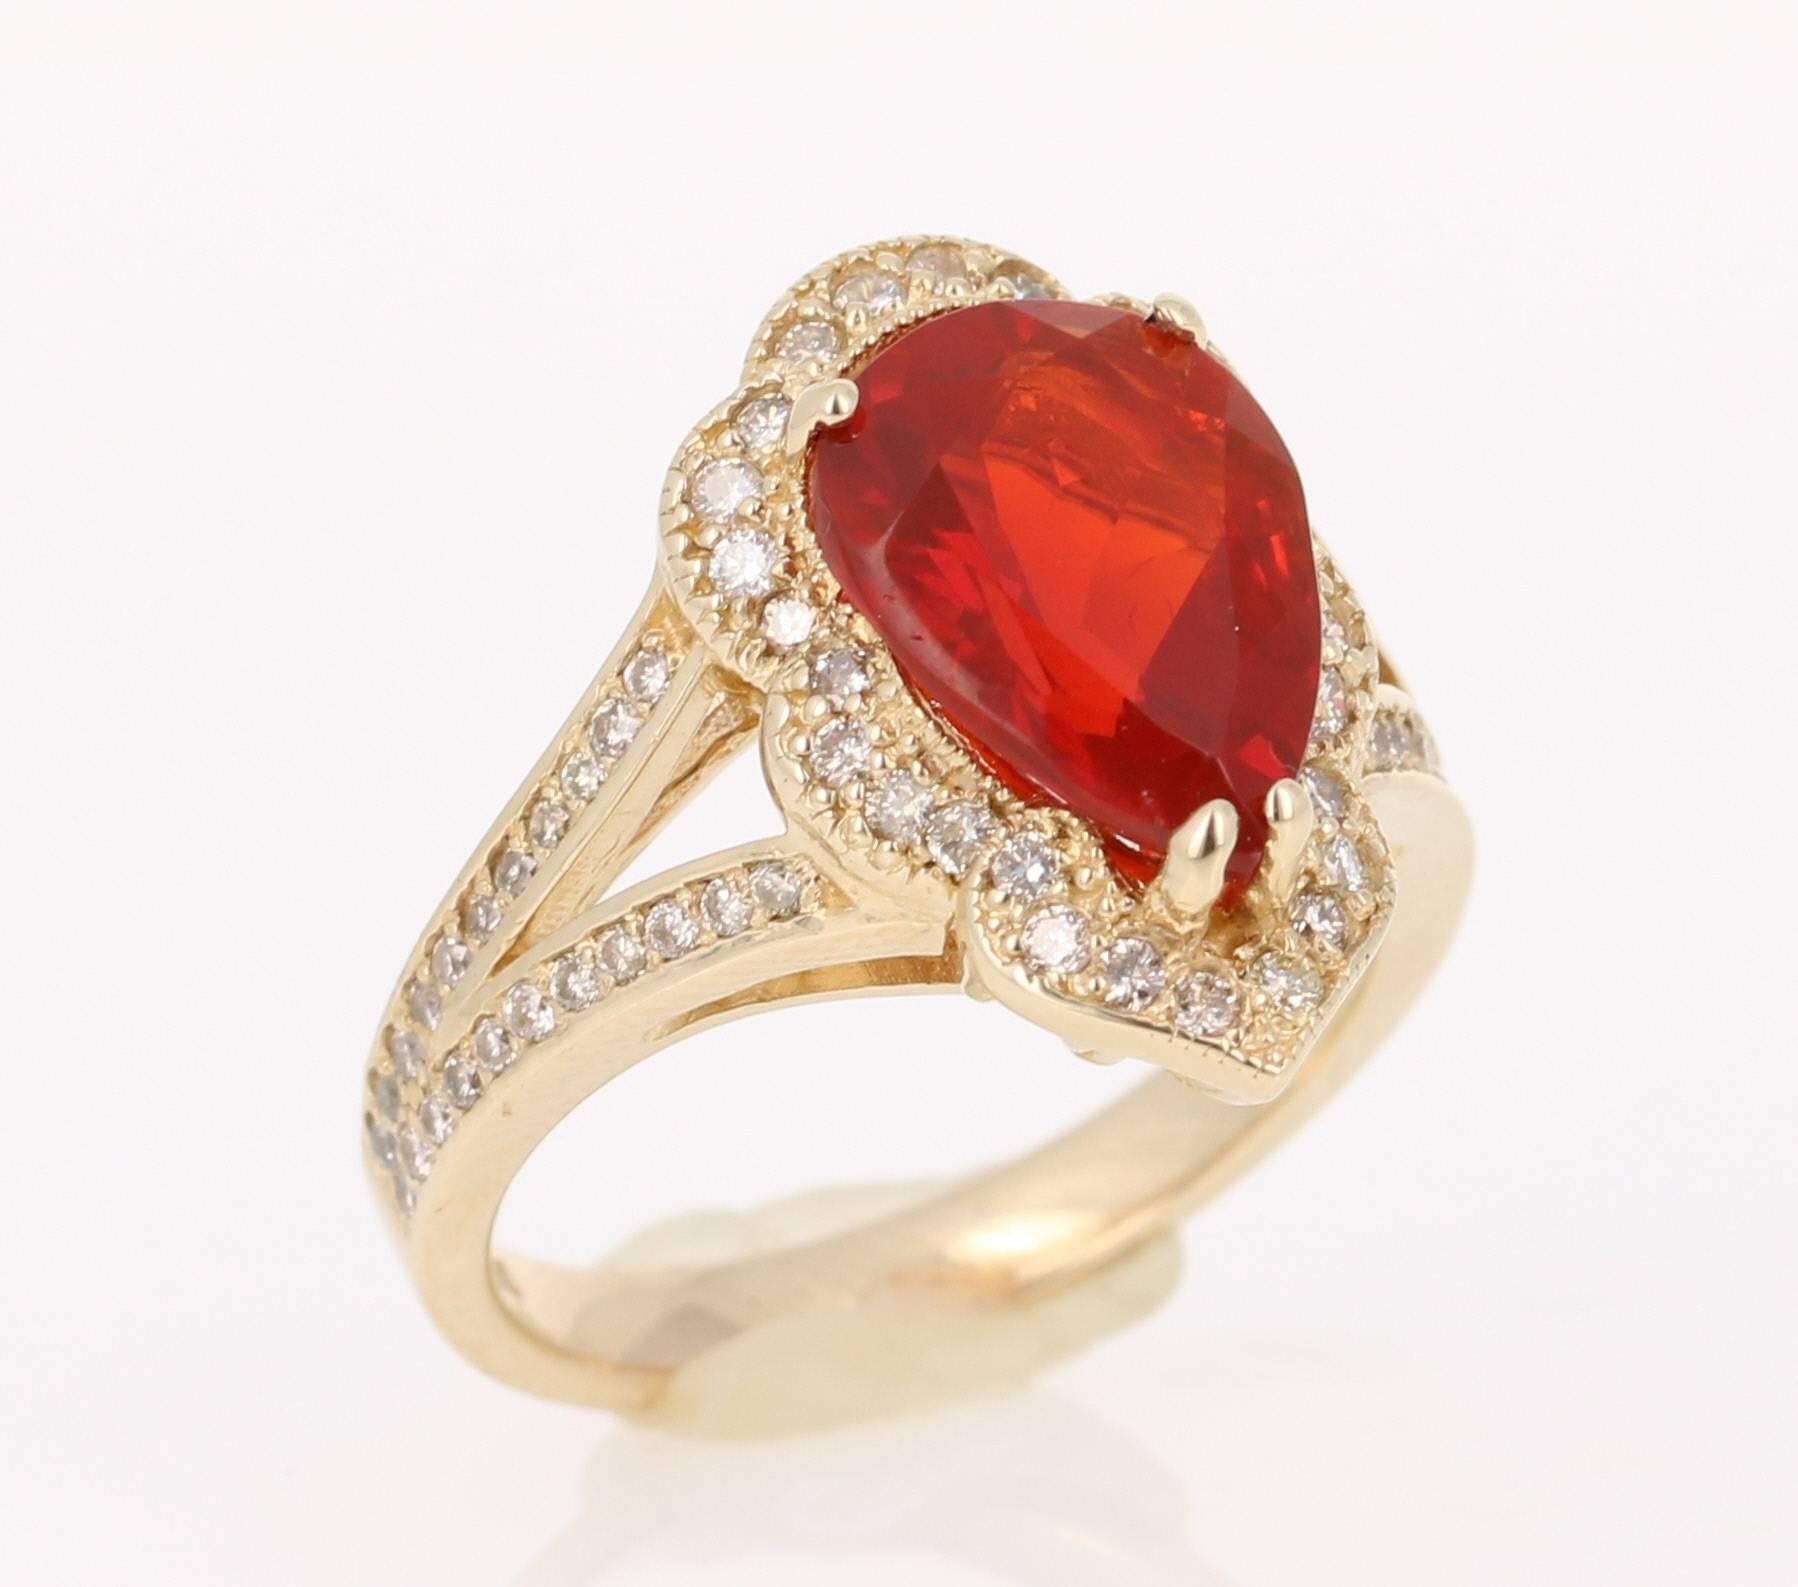 This gorgeous ring can totally be an engagement ring for someone that wants to dip into something a bit edgy and different.  It has a beautiful Pear Cut Fire Opal that weighs 2.65 Carats and 72 Round Cut Diamonds that weigh 0.60 Carats. The clarity